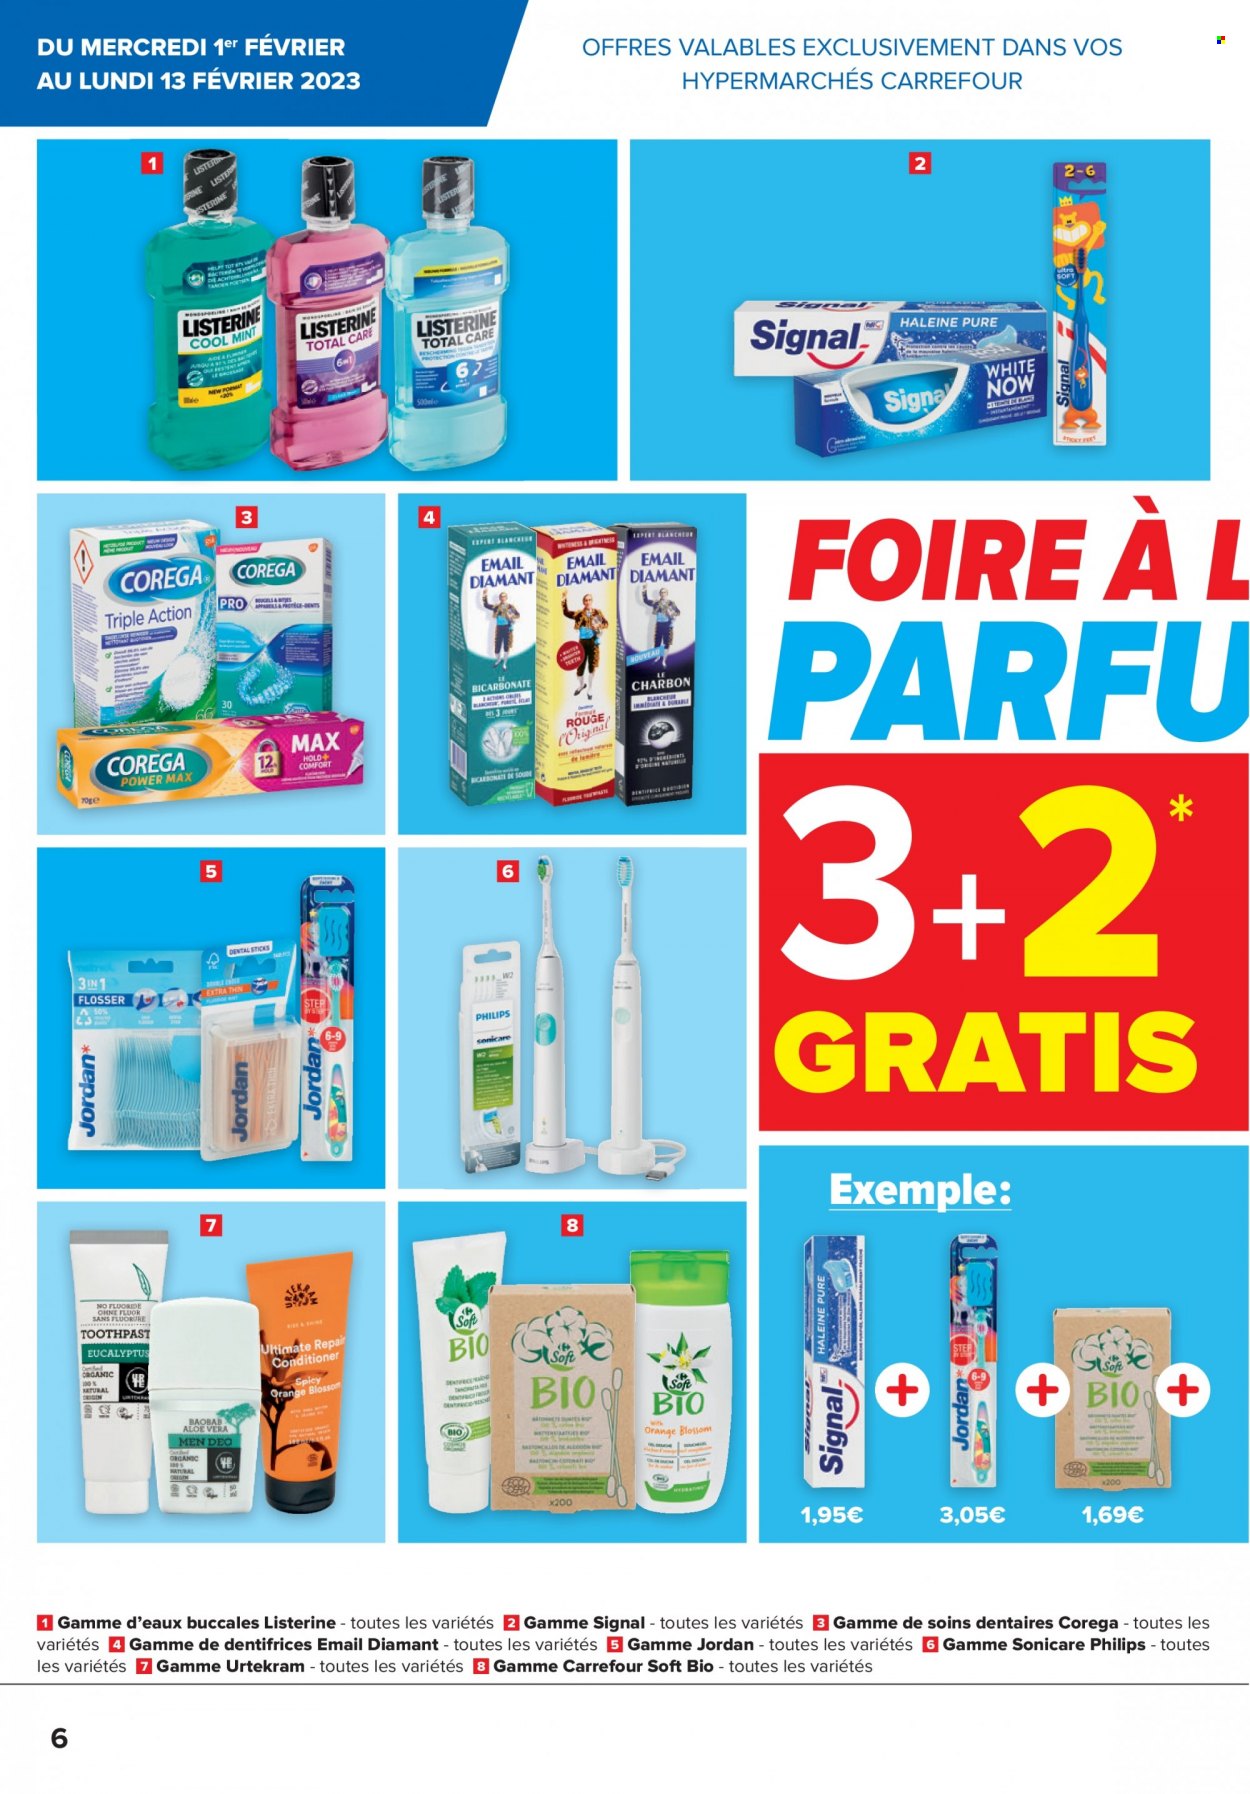 Catalogue Carrefour hypermarkt - 1.2.2023 - 13.2.2023. Page 6.